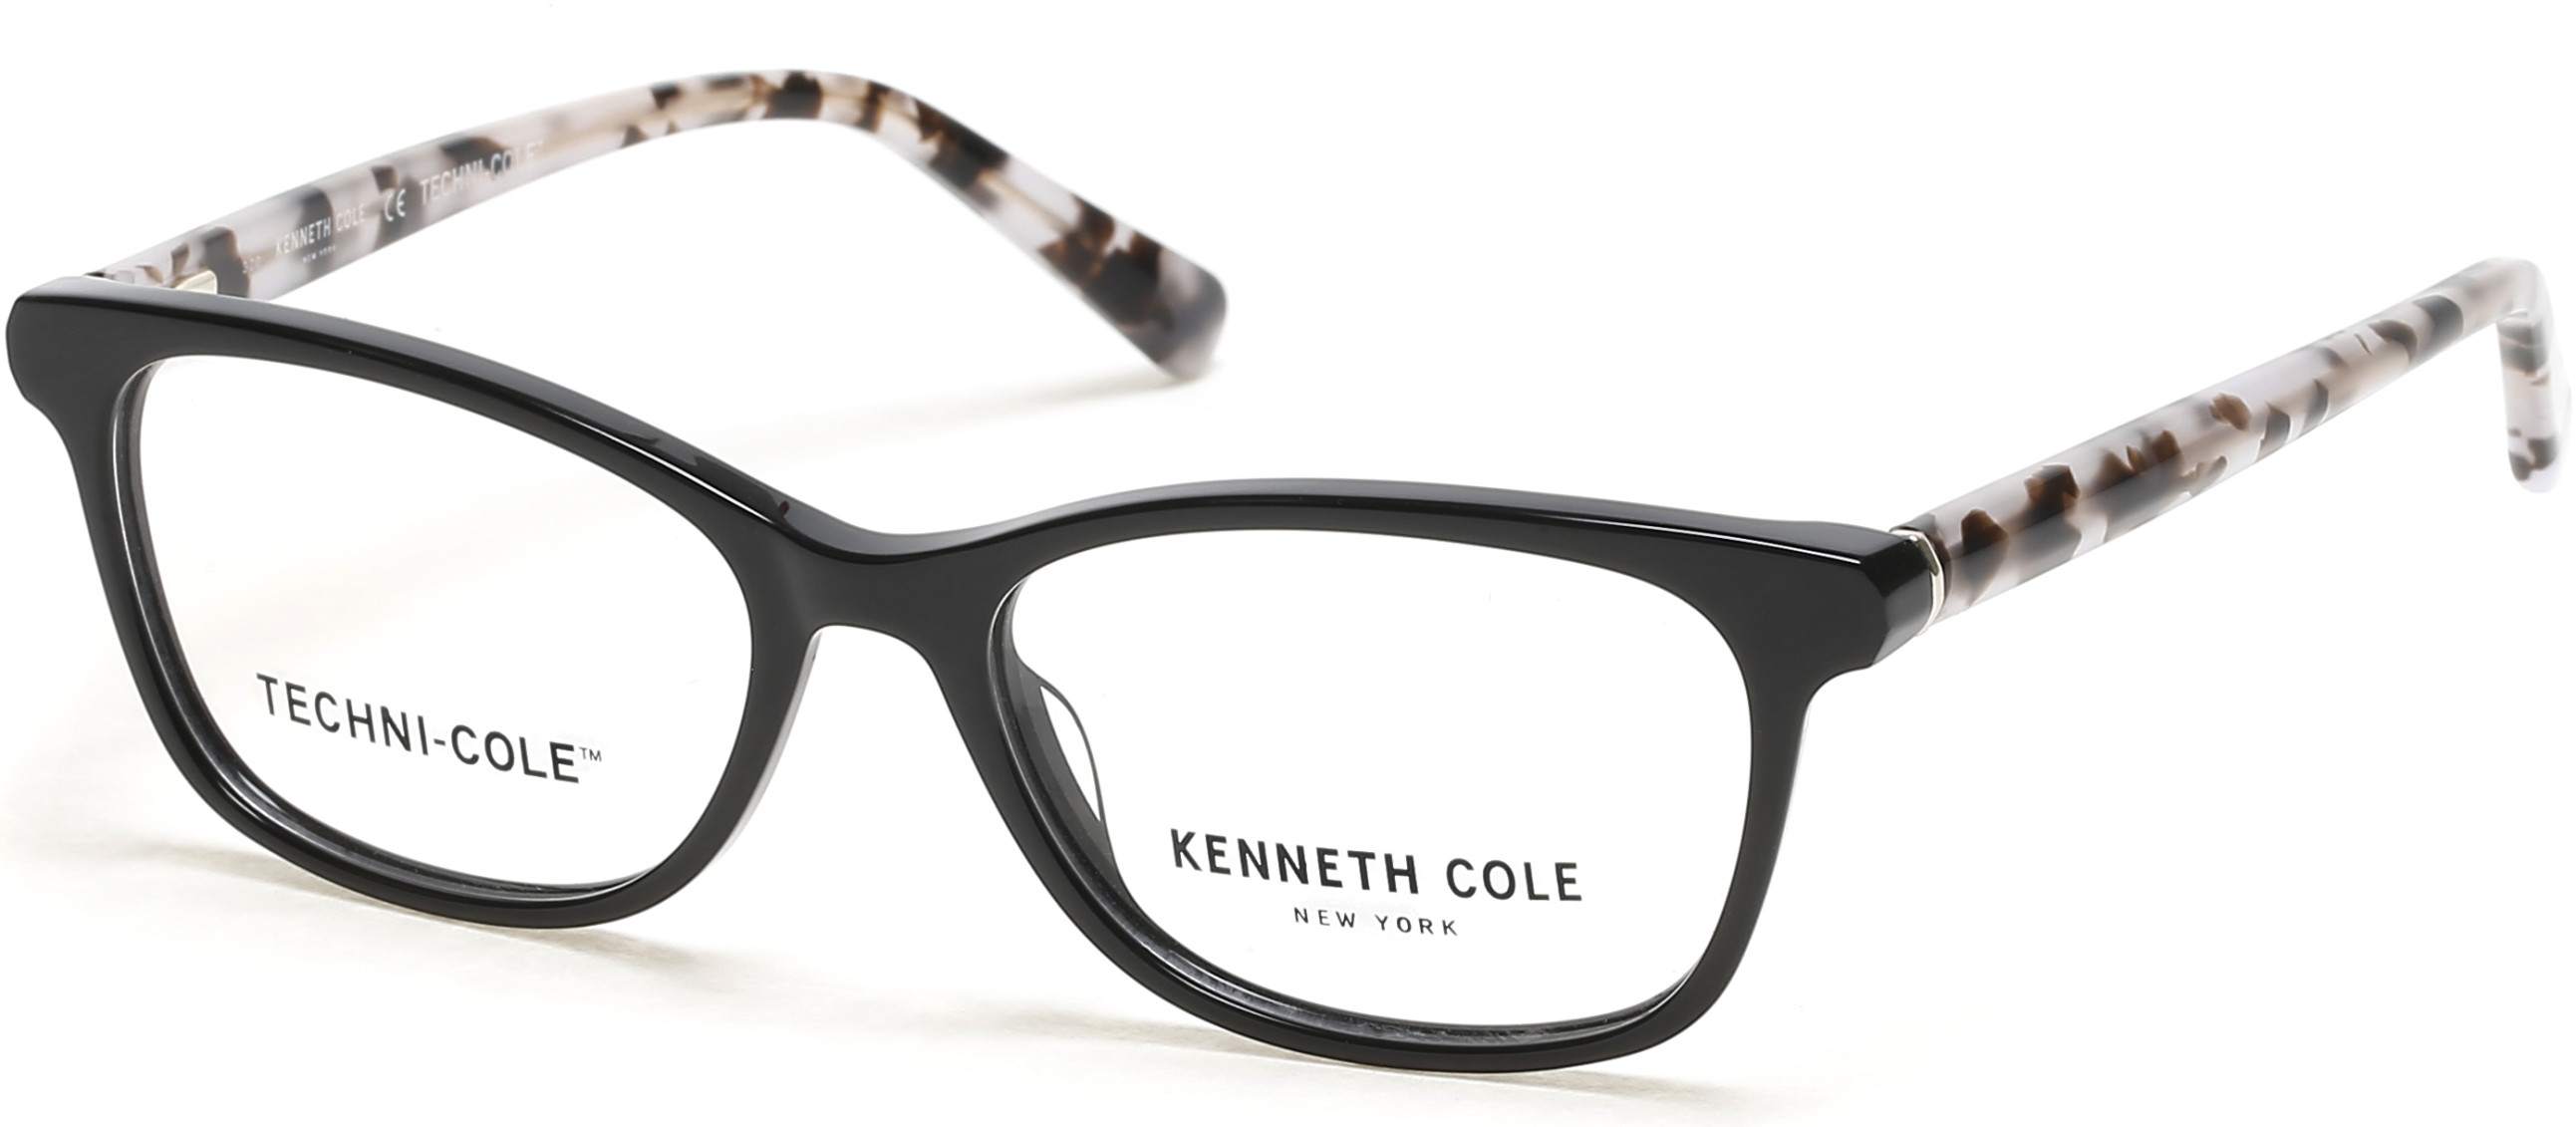 KENNETH COLE NY 0326 001